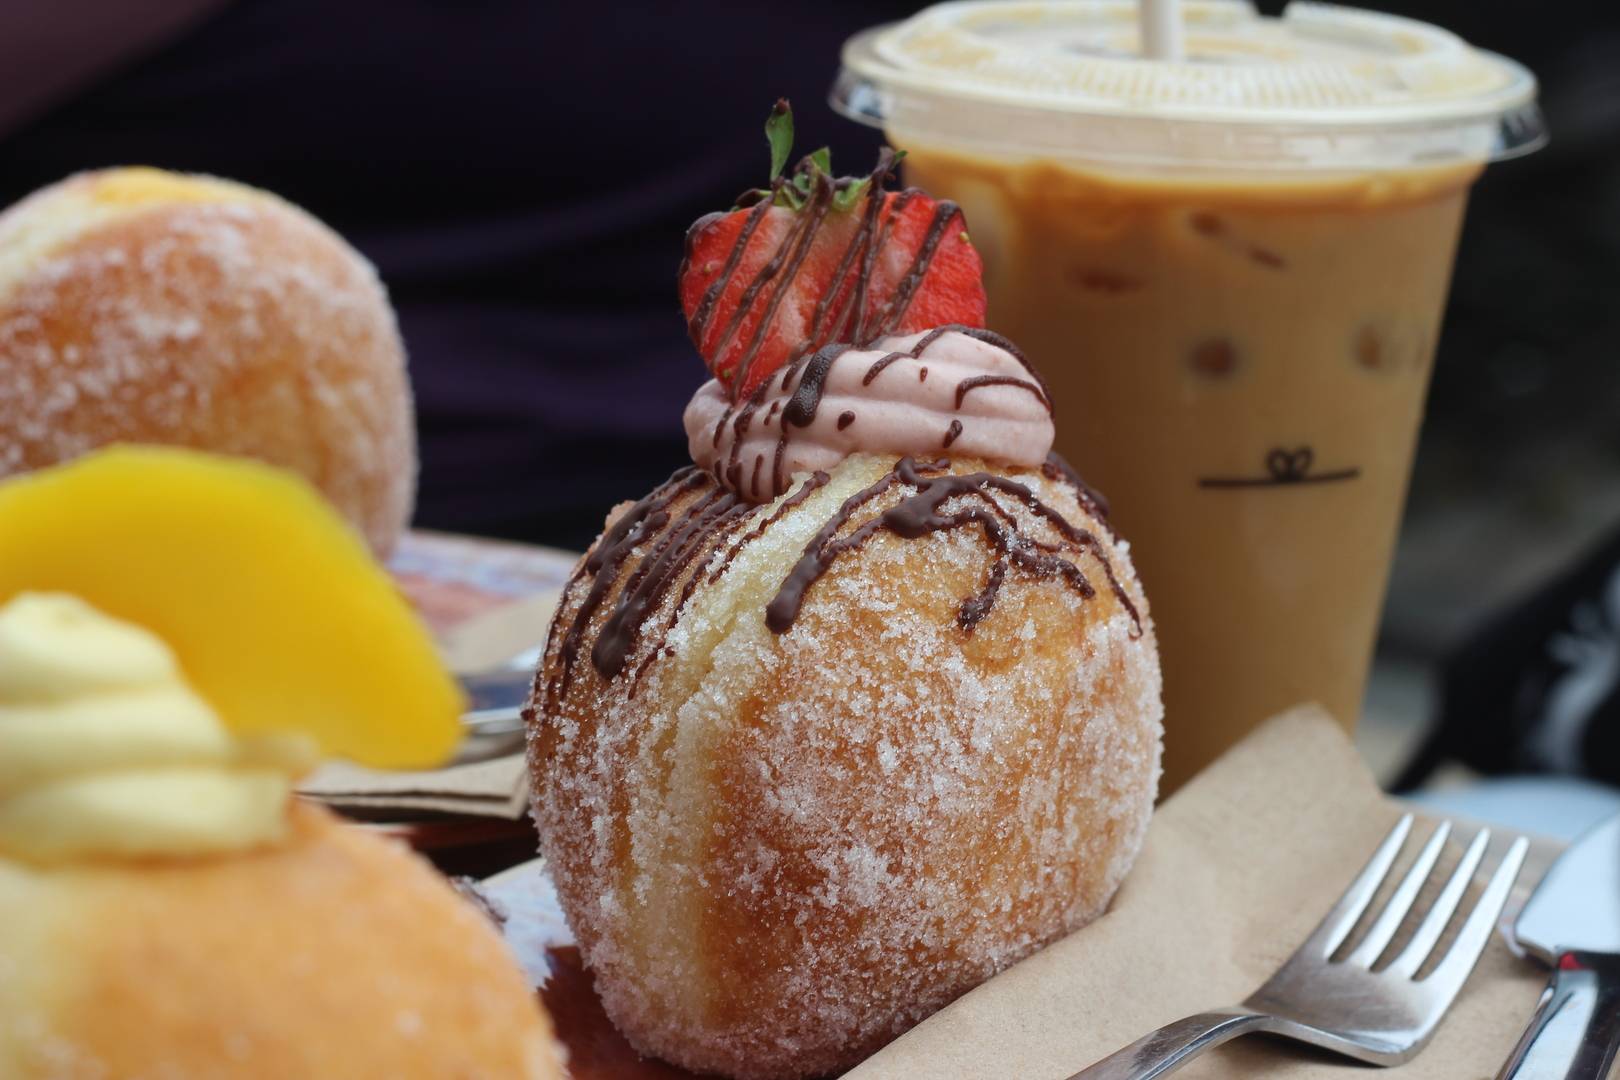 Image of donut and iced coffee